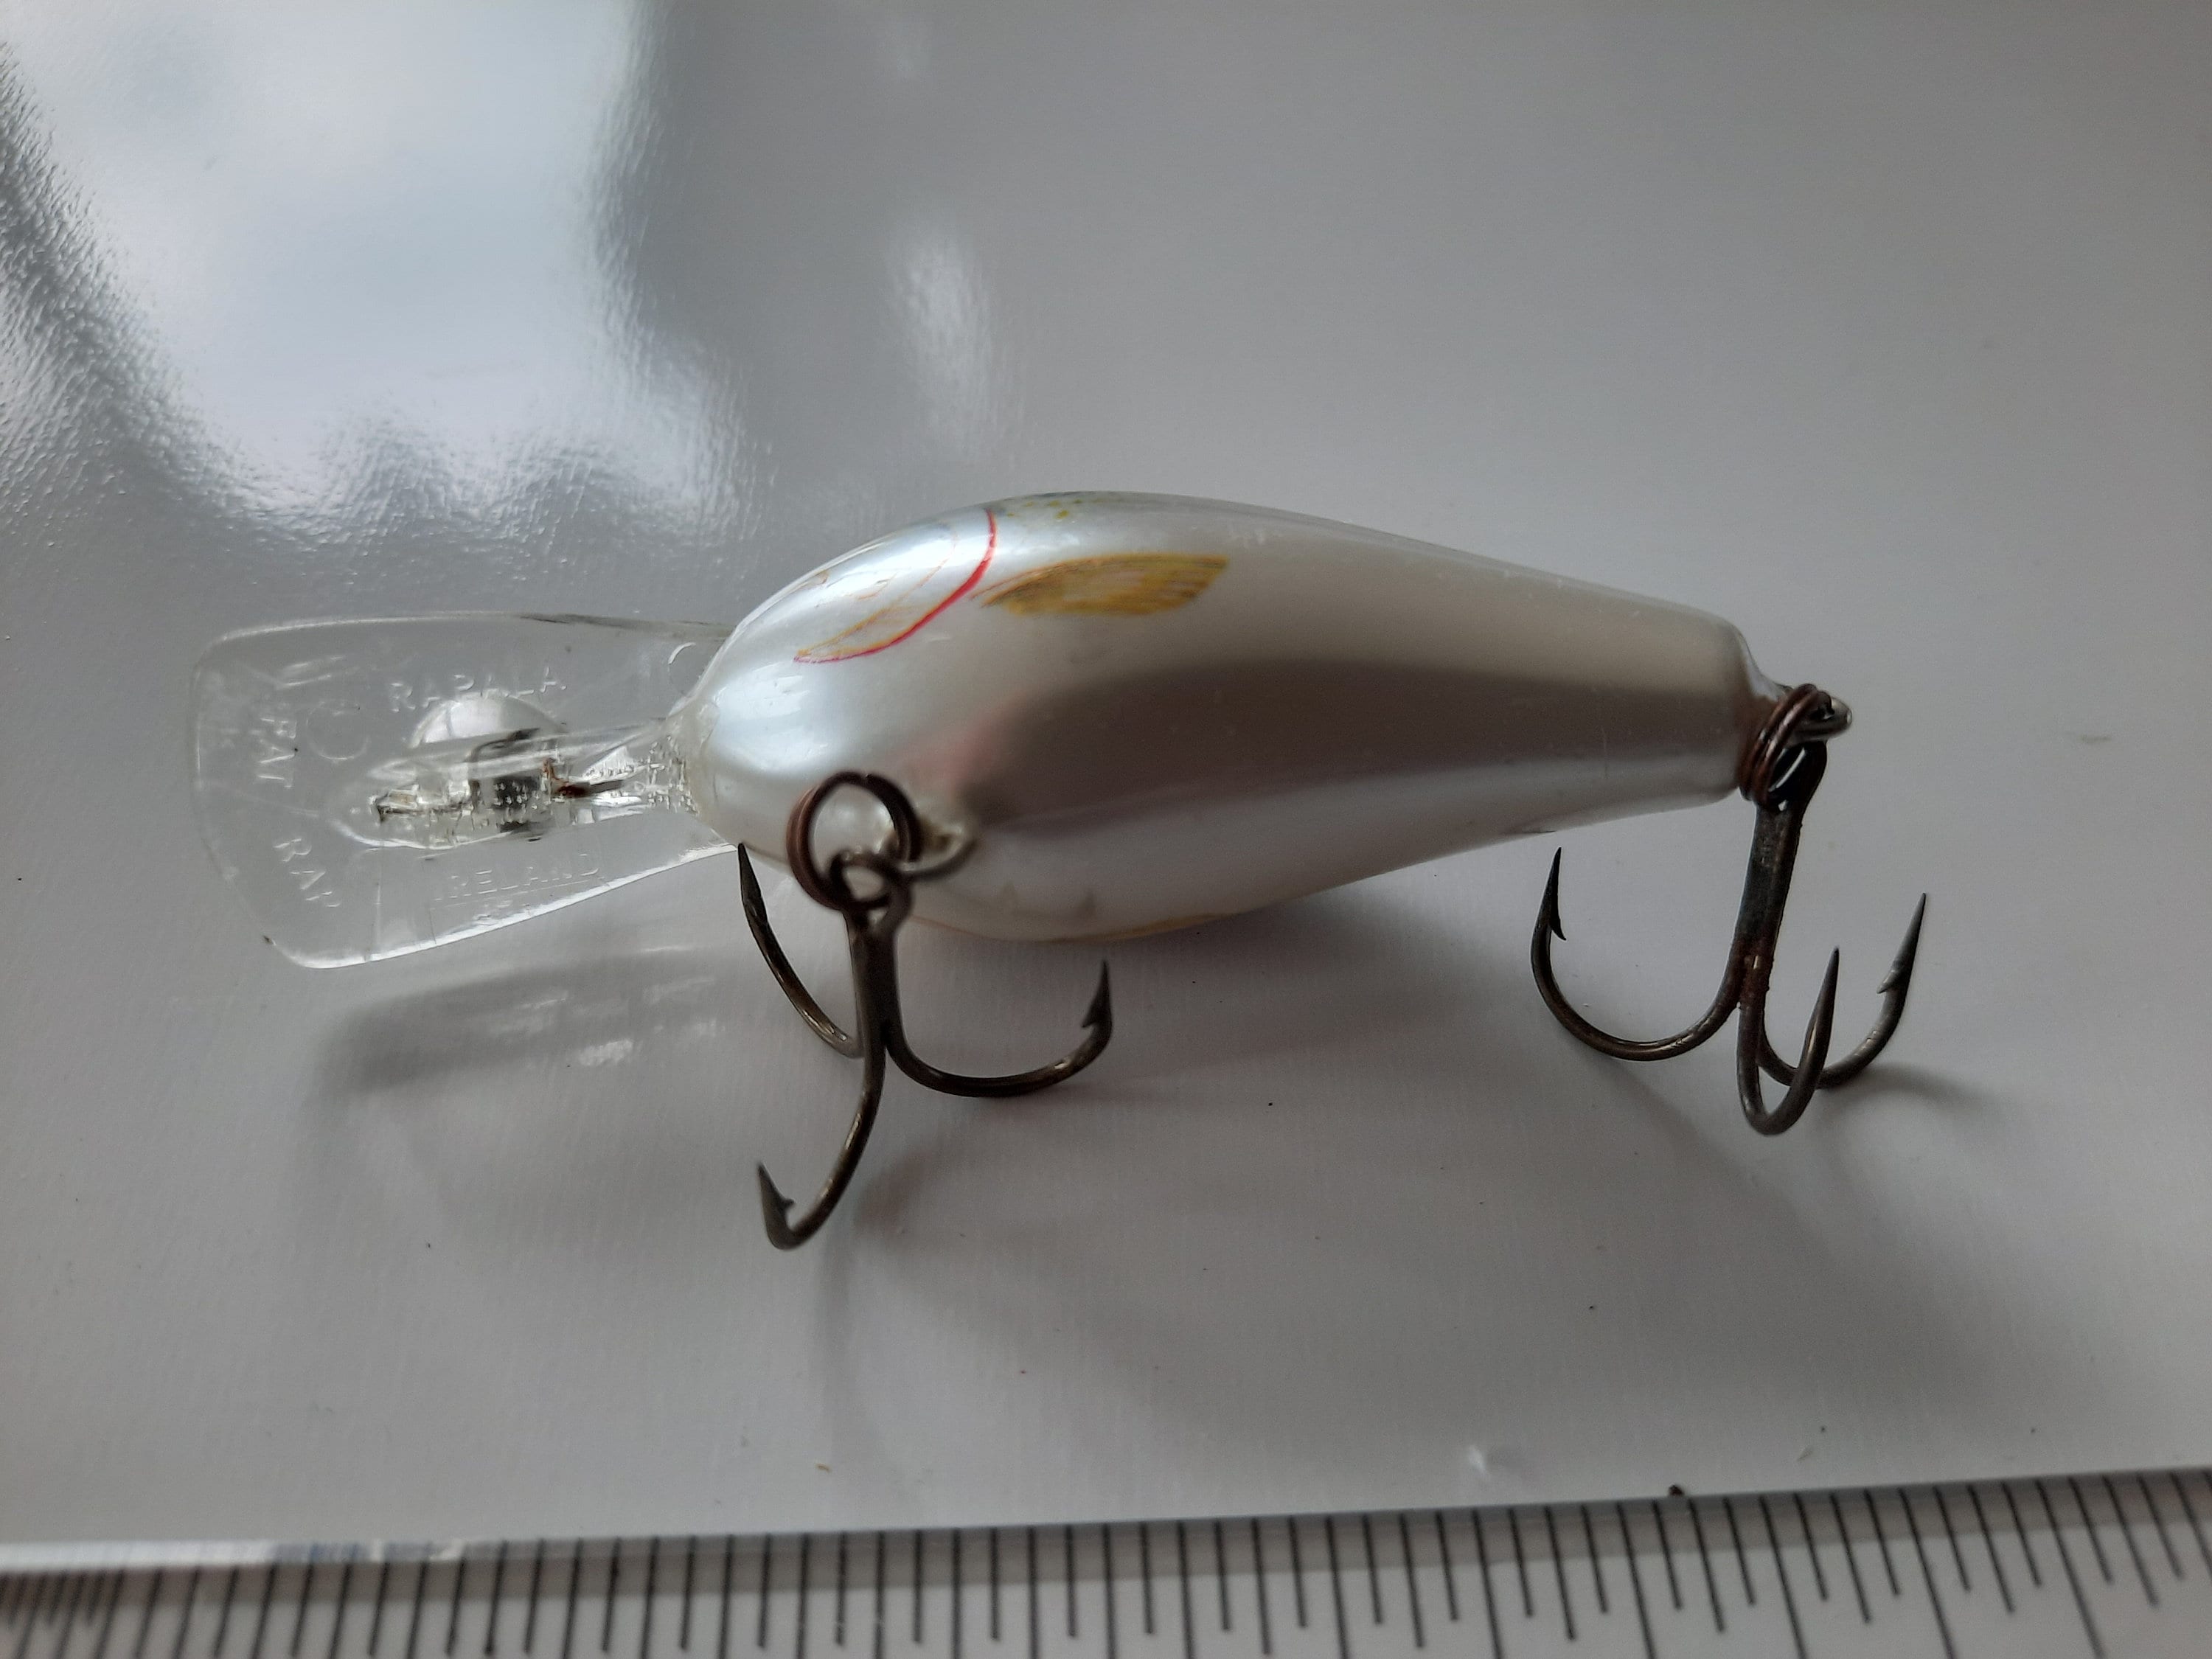 Vintage Wooden Fishing Lure: Rapala Fat Rap Medium Diving Crankbait,  Natural Gizzard Shad, 3, 1/2 Oz. Very Nice, Lightly Fished 1990s -   Canada